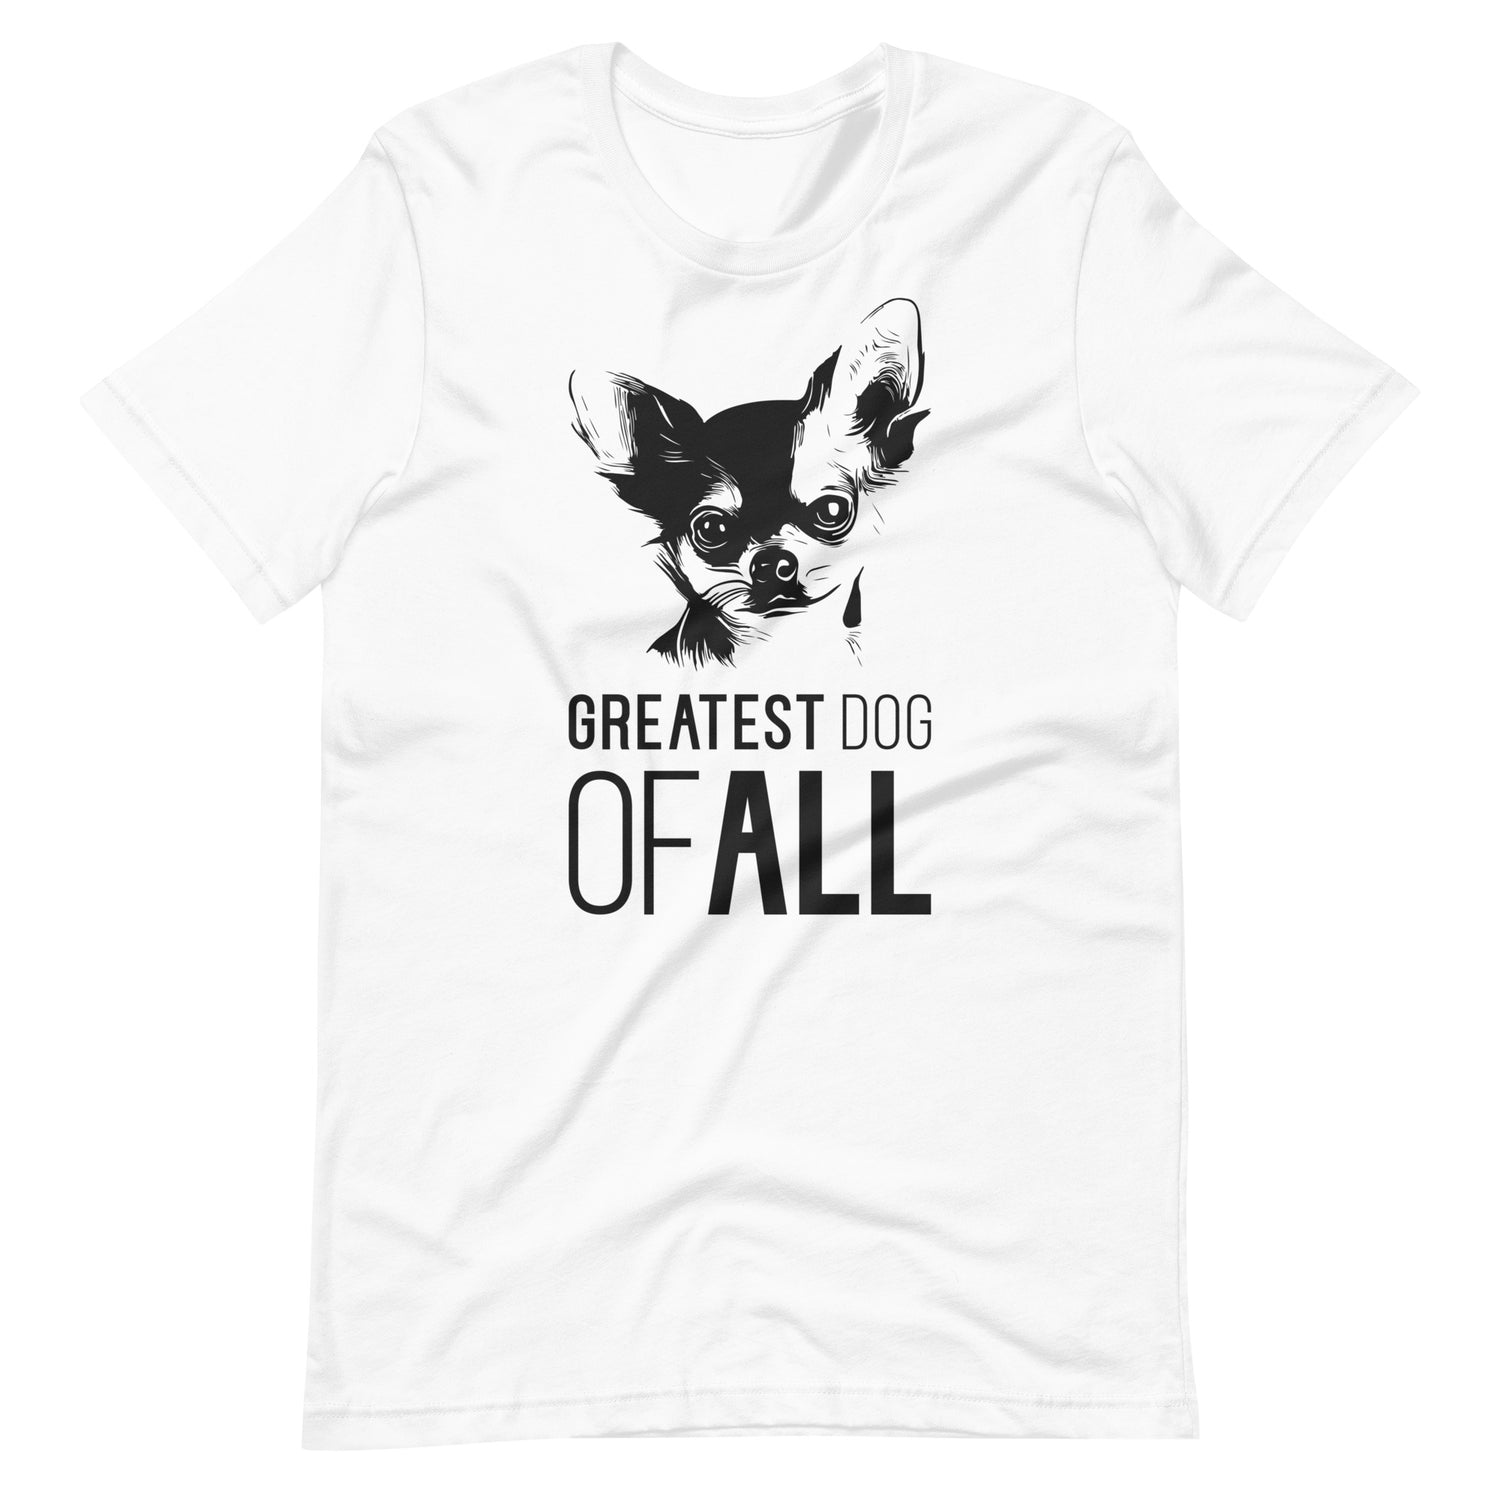 Black Chihuahua face silhouette with Greatest Dog of All caption on unisex white t-shirt